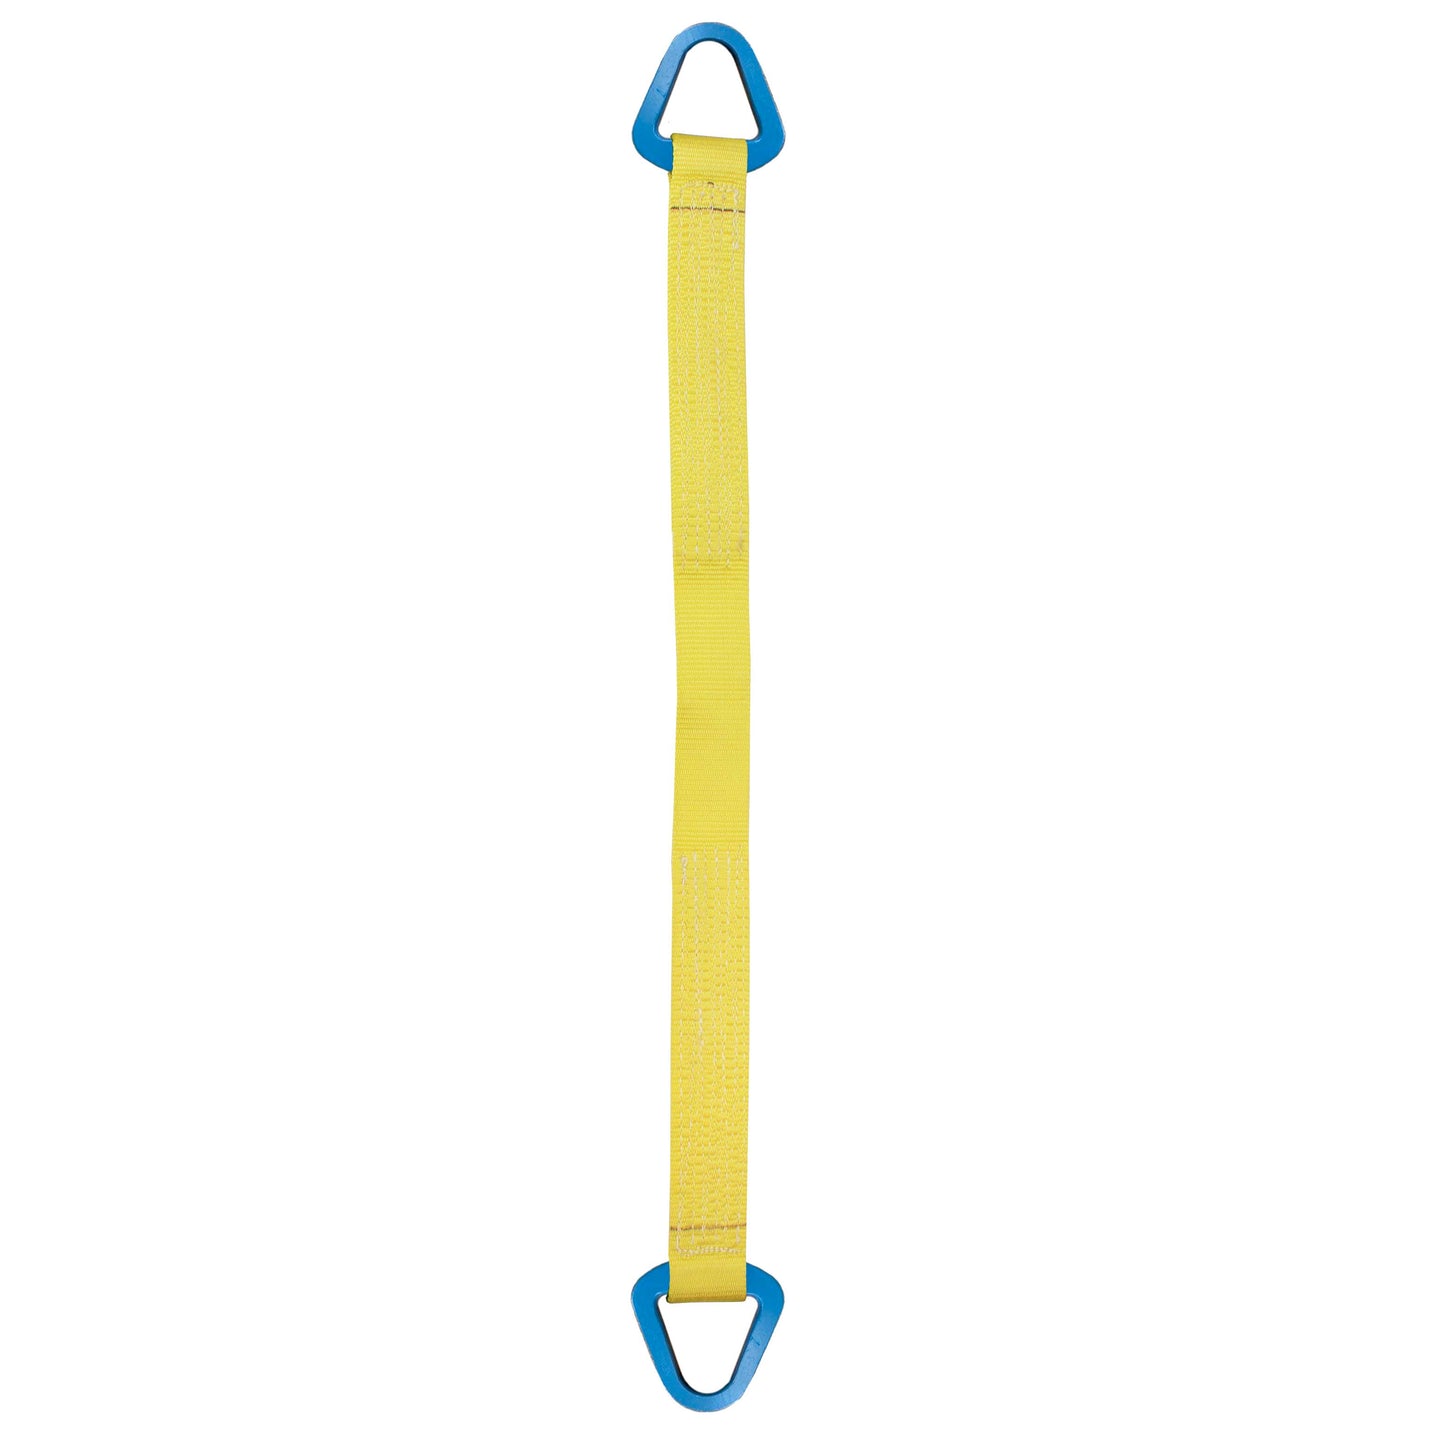 Nylon Lifting Sling Triangle 3 inch x 8 foot 1ply image 1 of 2